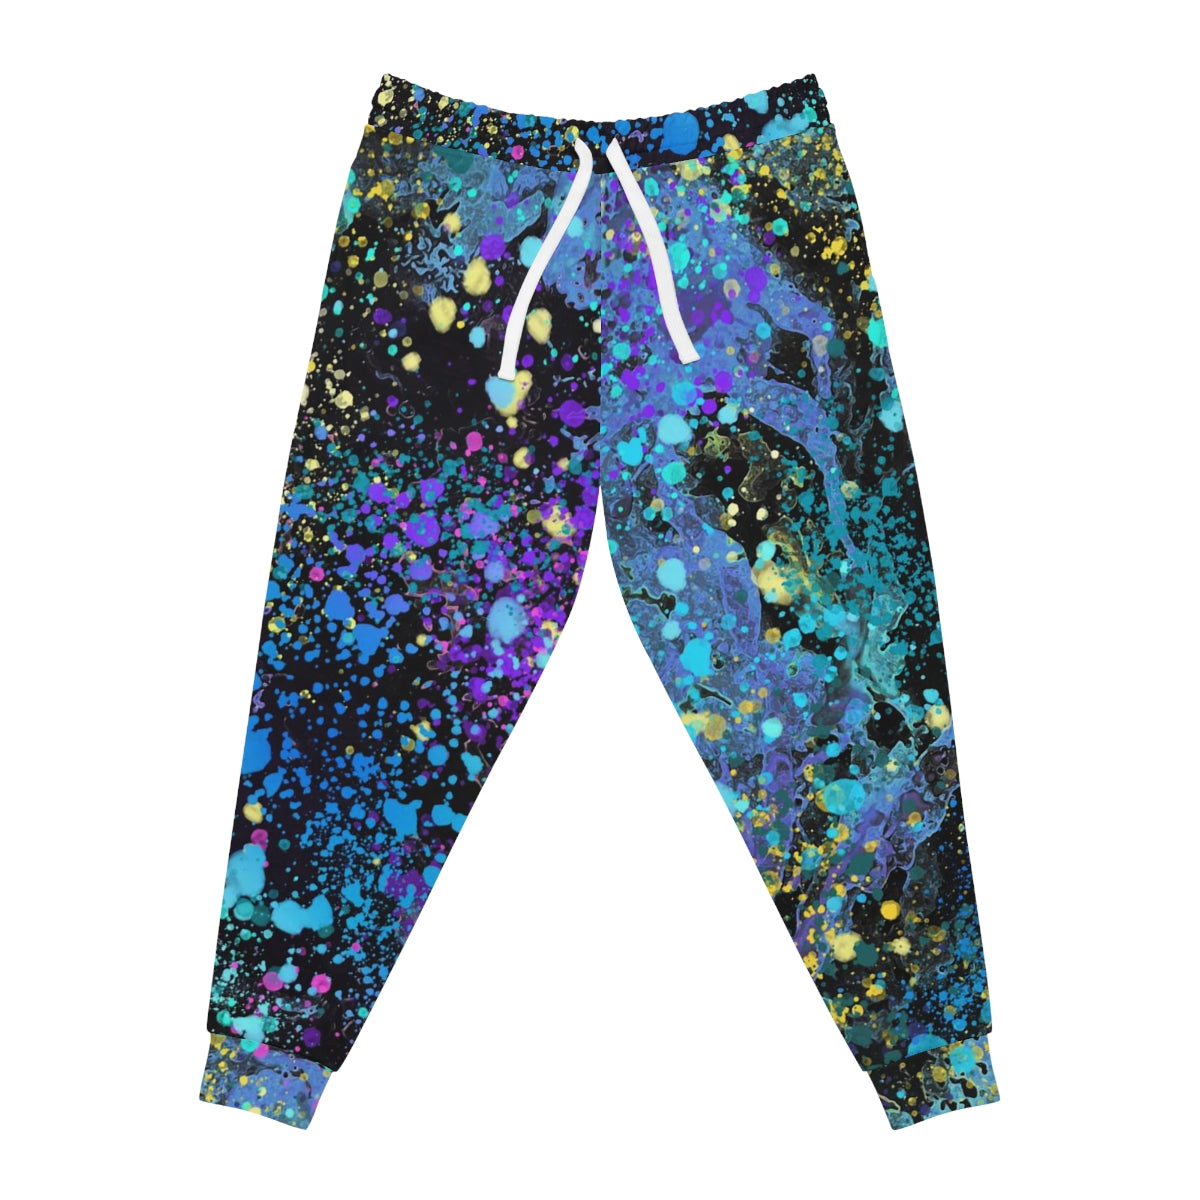 Athletic Joggers - Colorful Universe